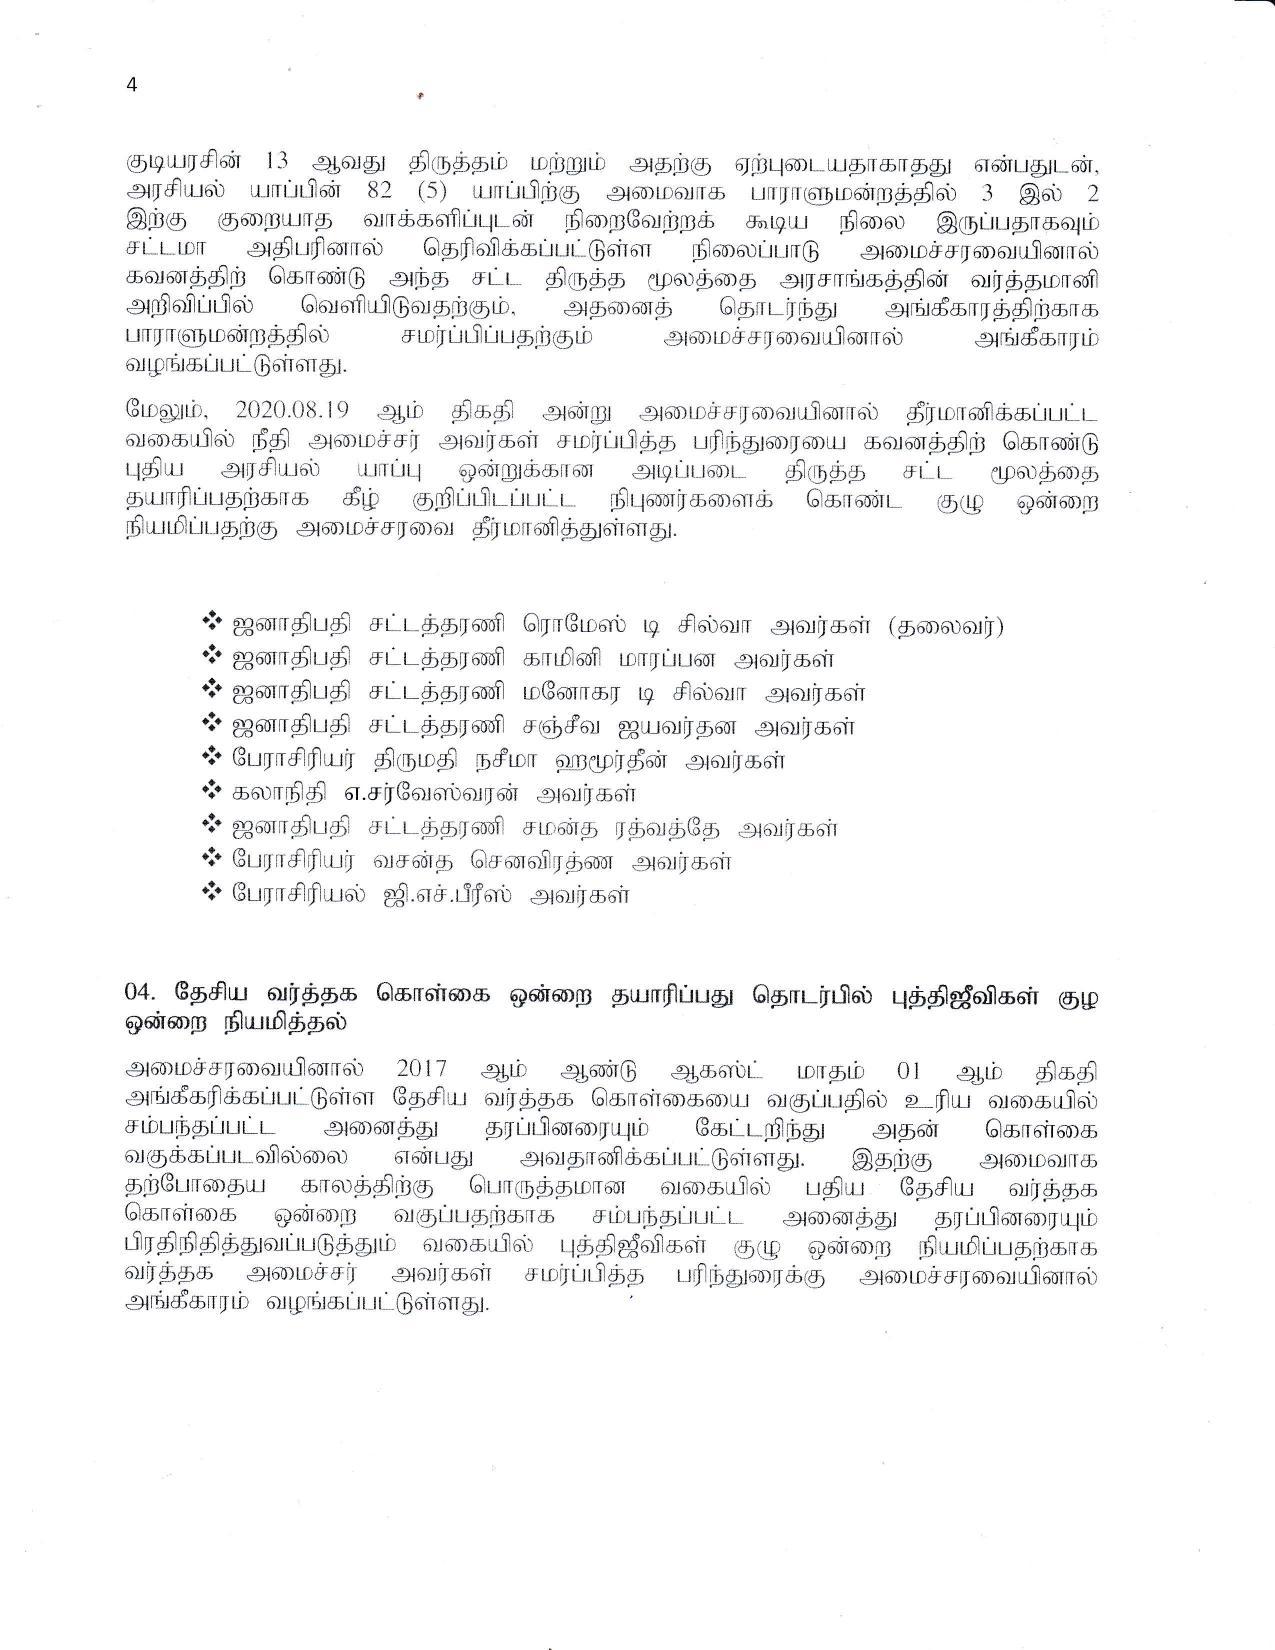 Cabinet Decision on 02.09.2020 Tamil min page 004